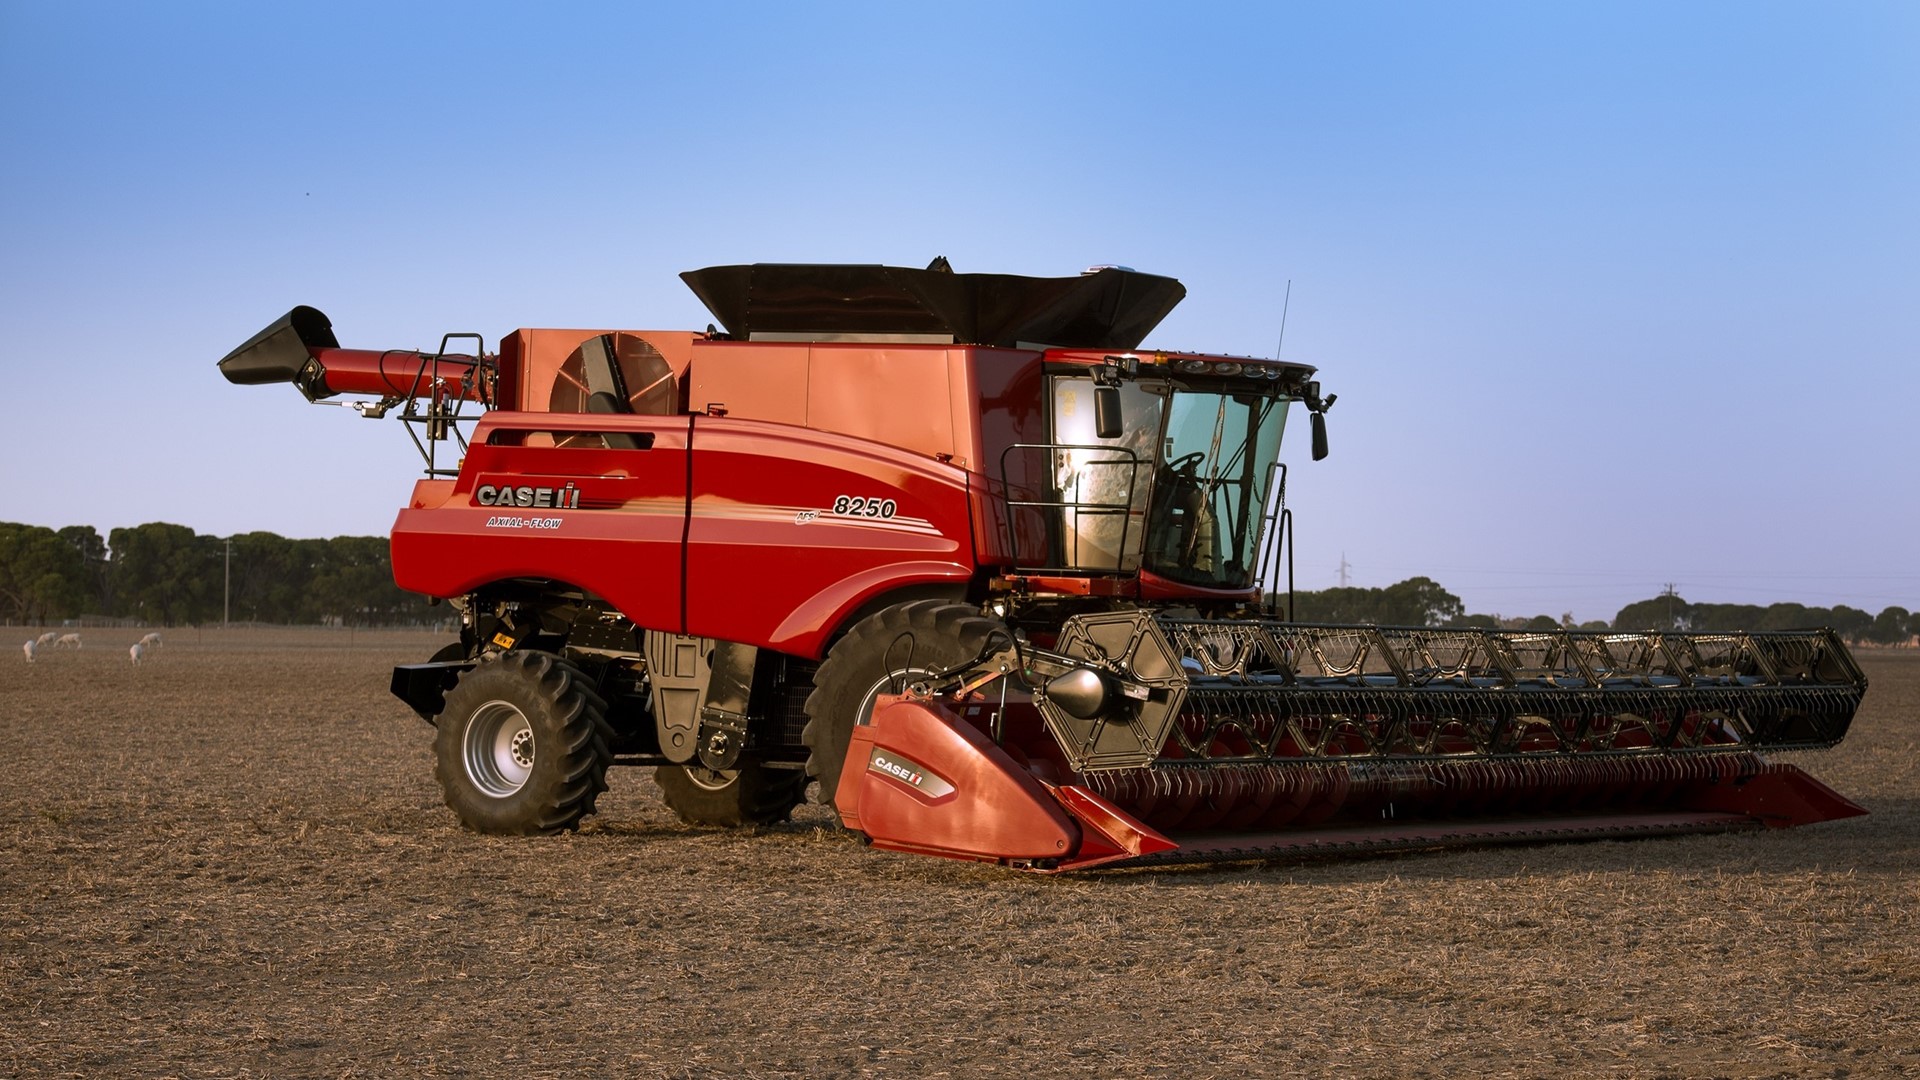 The latest Axial-Flow 250 Series from Case IH offers the ground-breaking AFS Harvest Command technology